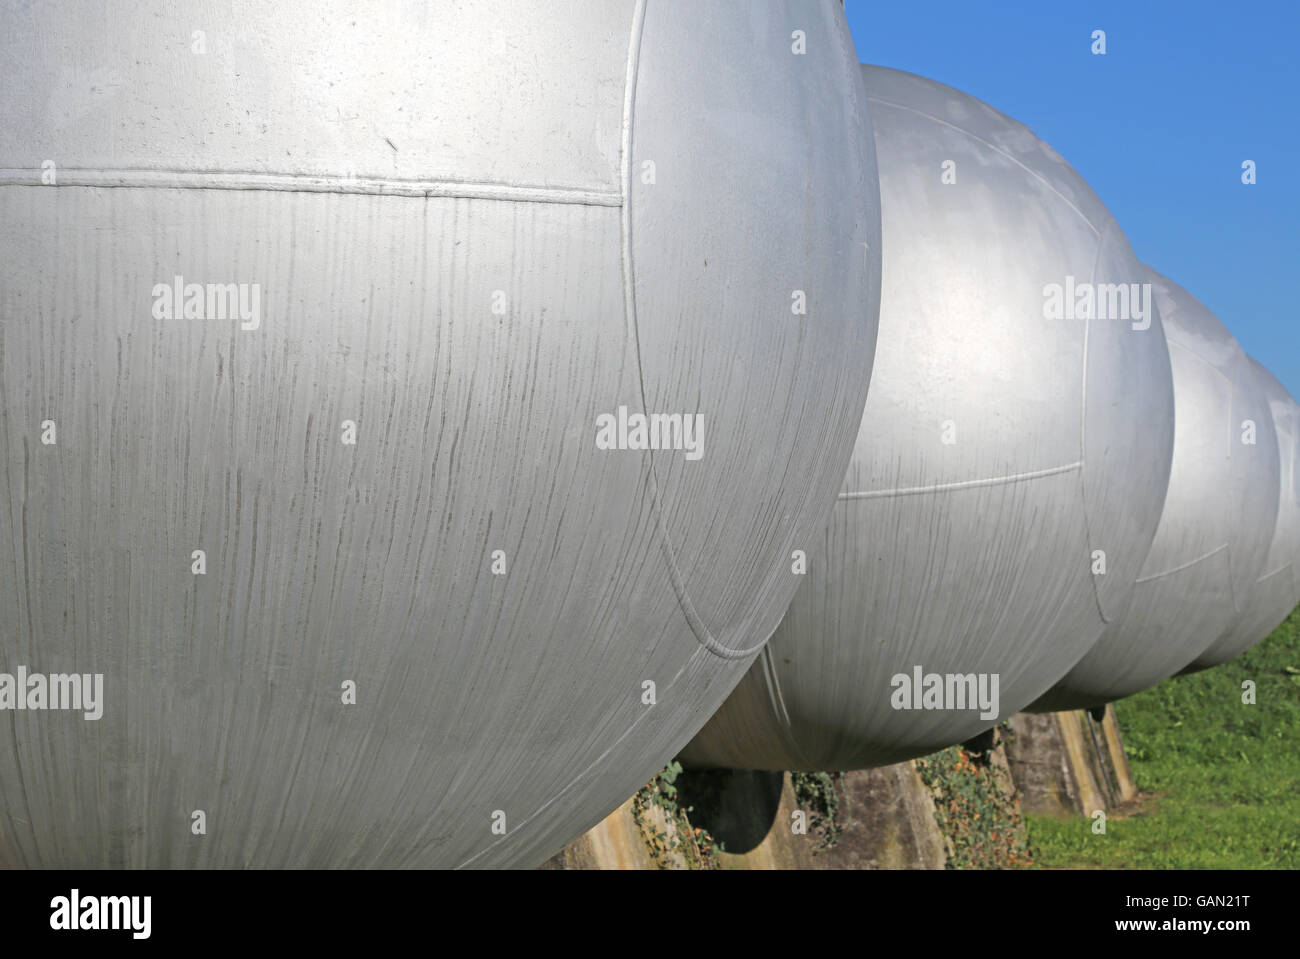 many gas tank for the storage of flammable propane gas in the fuel production refinery Stock Photo